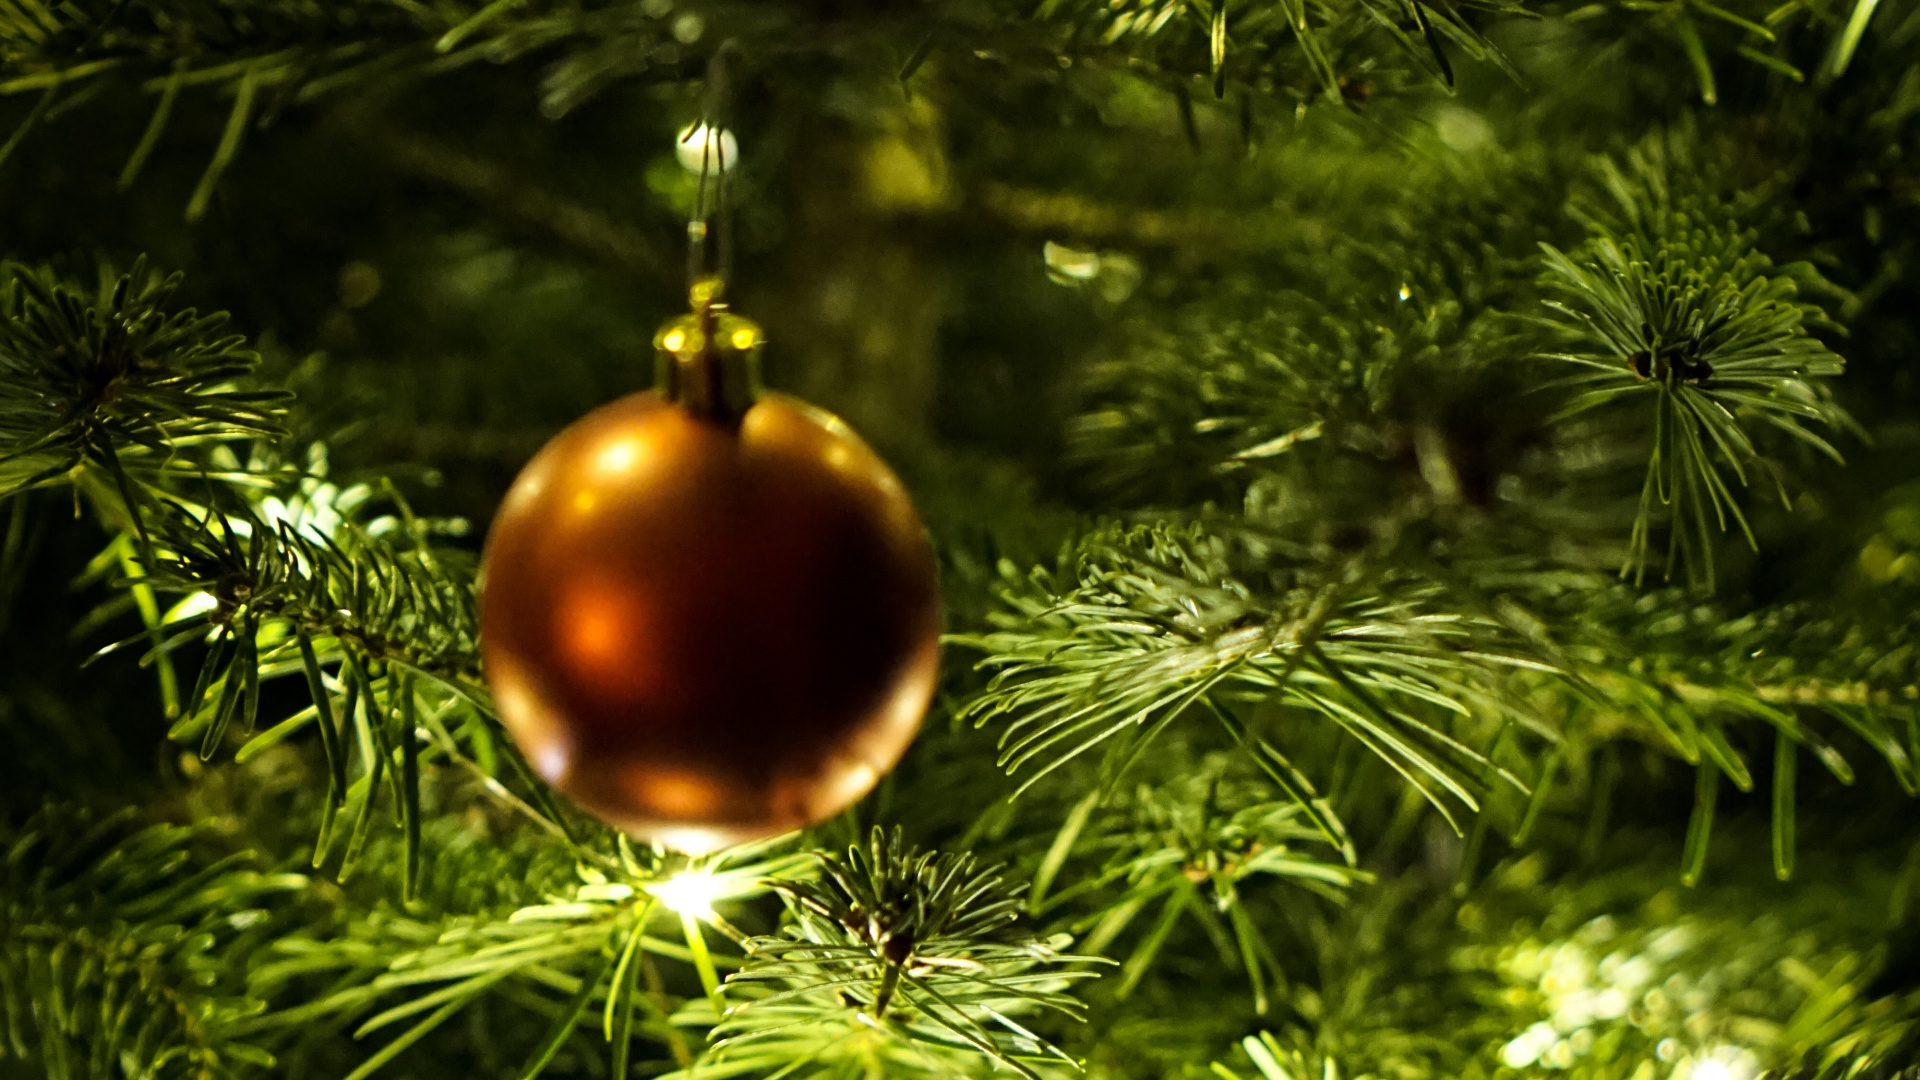 New Year, Christmas Day, Christmas Ornament, Christmas Decoration, Christmas Tree. Wallpaper in 1920x1080 Resolution